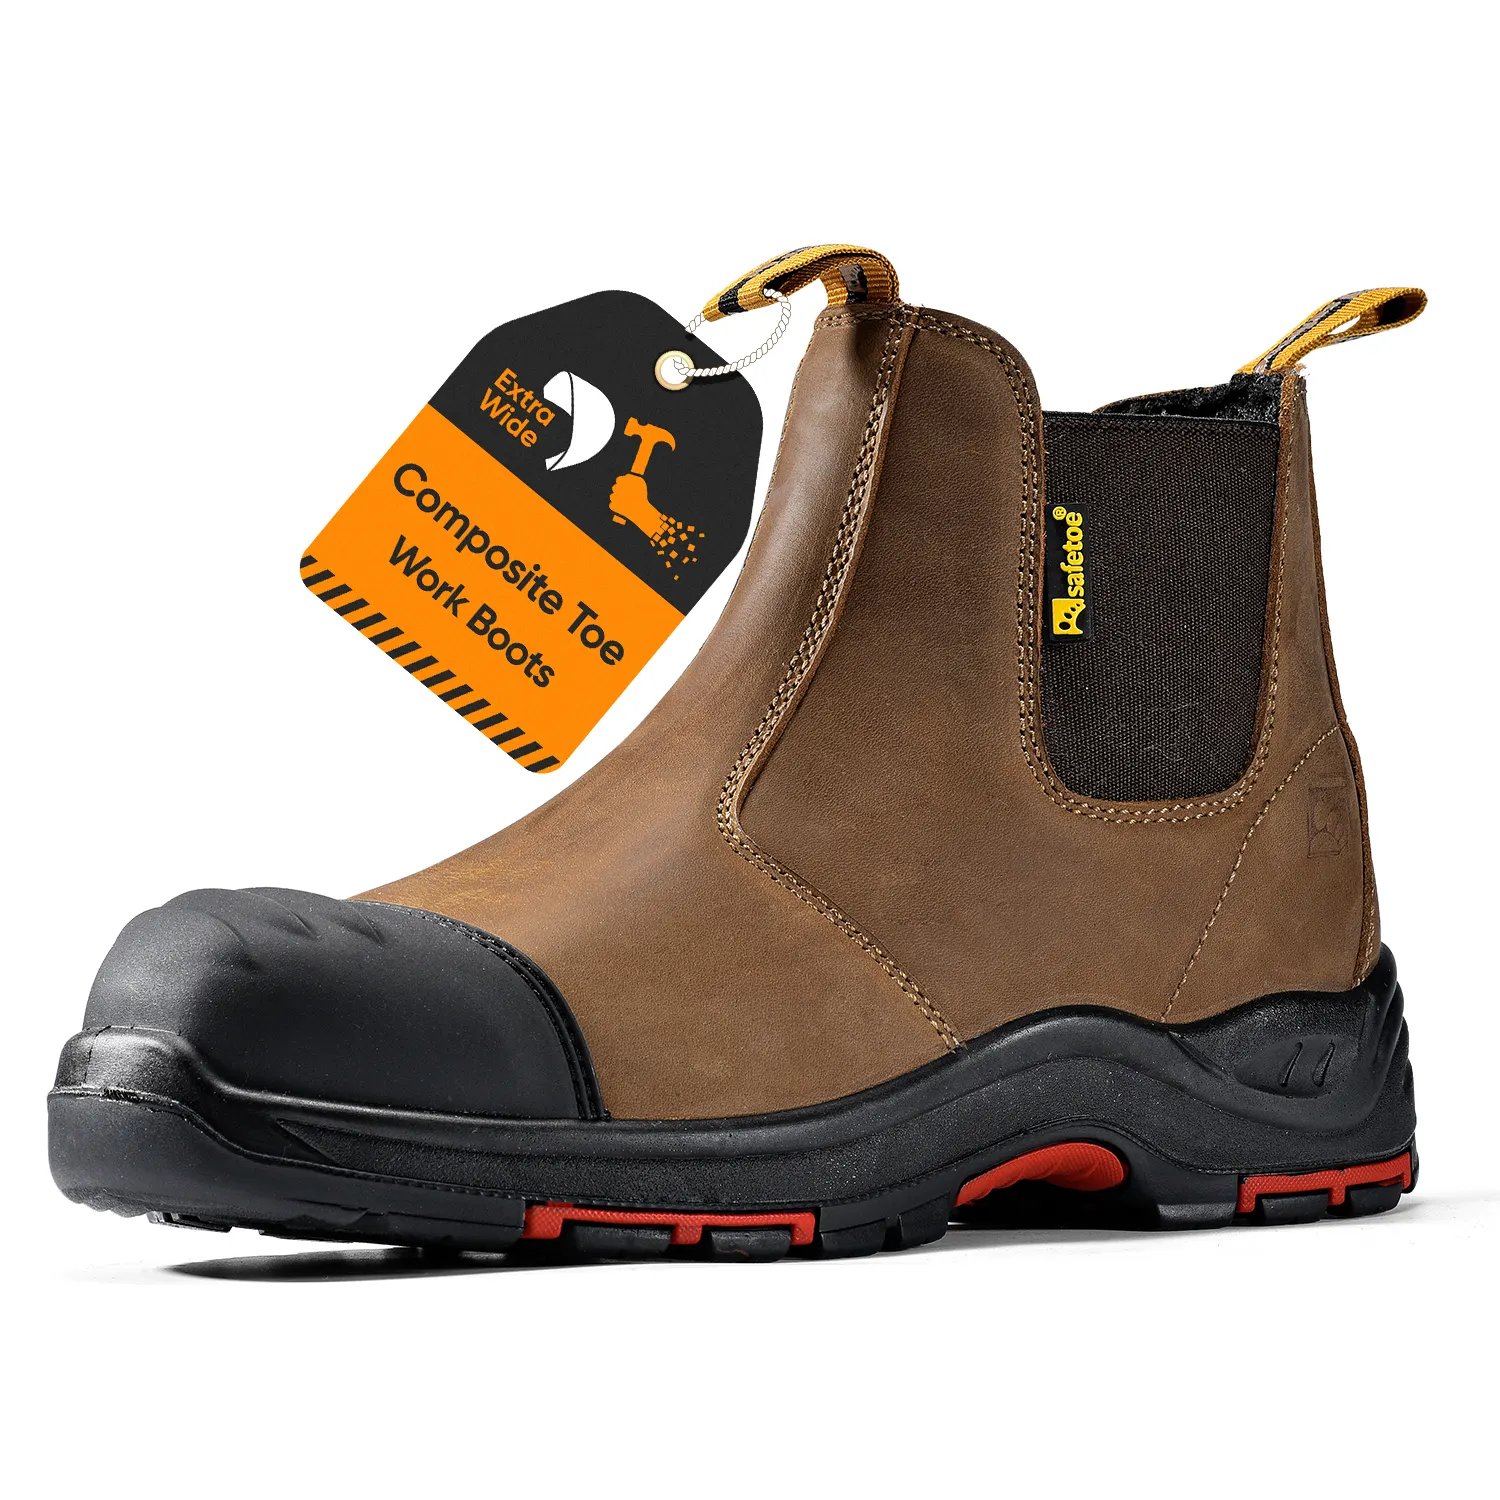 Safetoe S3 Composite Toe Safety Boot Men's Heavy Duty Mining Industrial Construction Work Boot Shoes